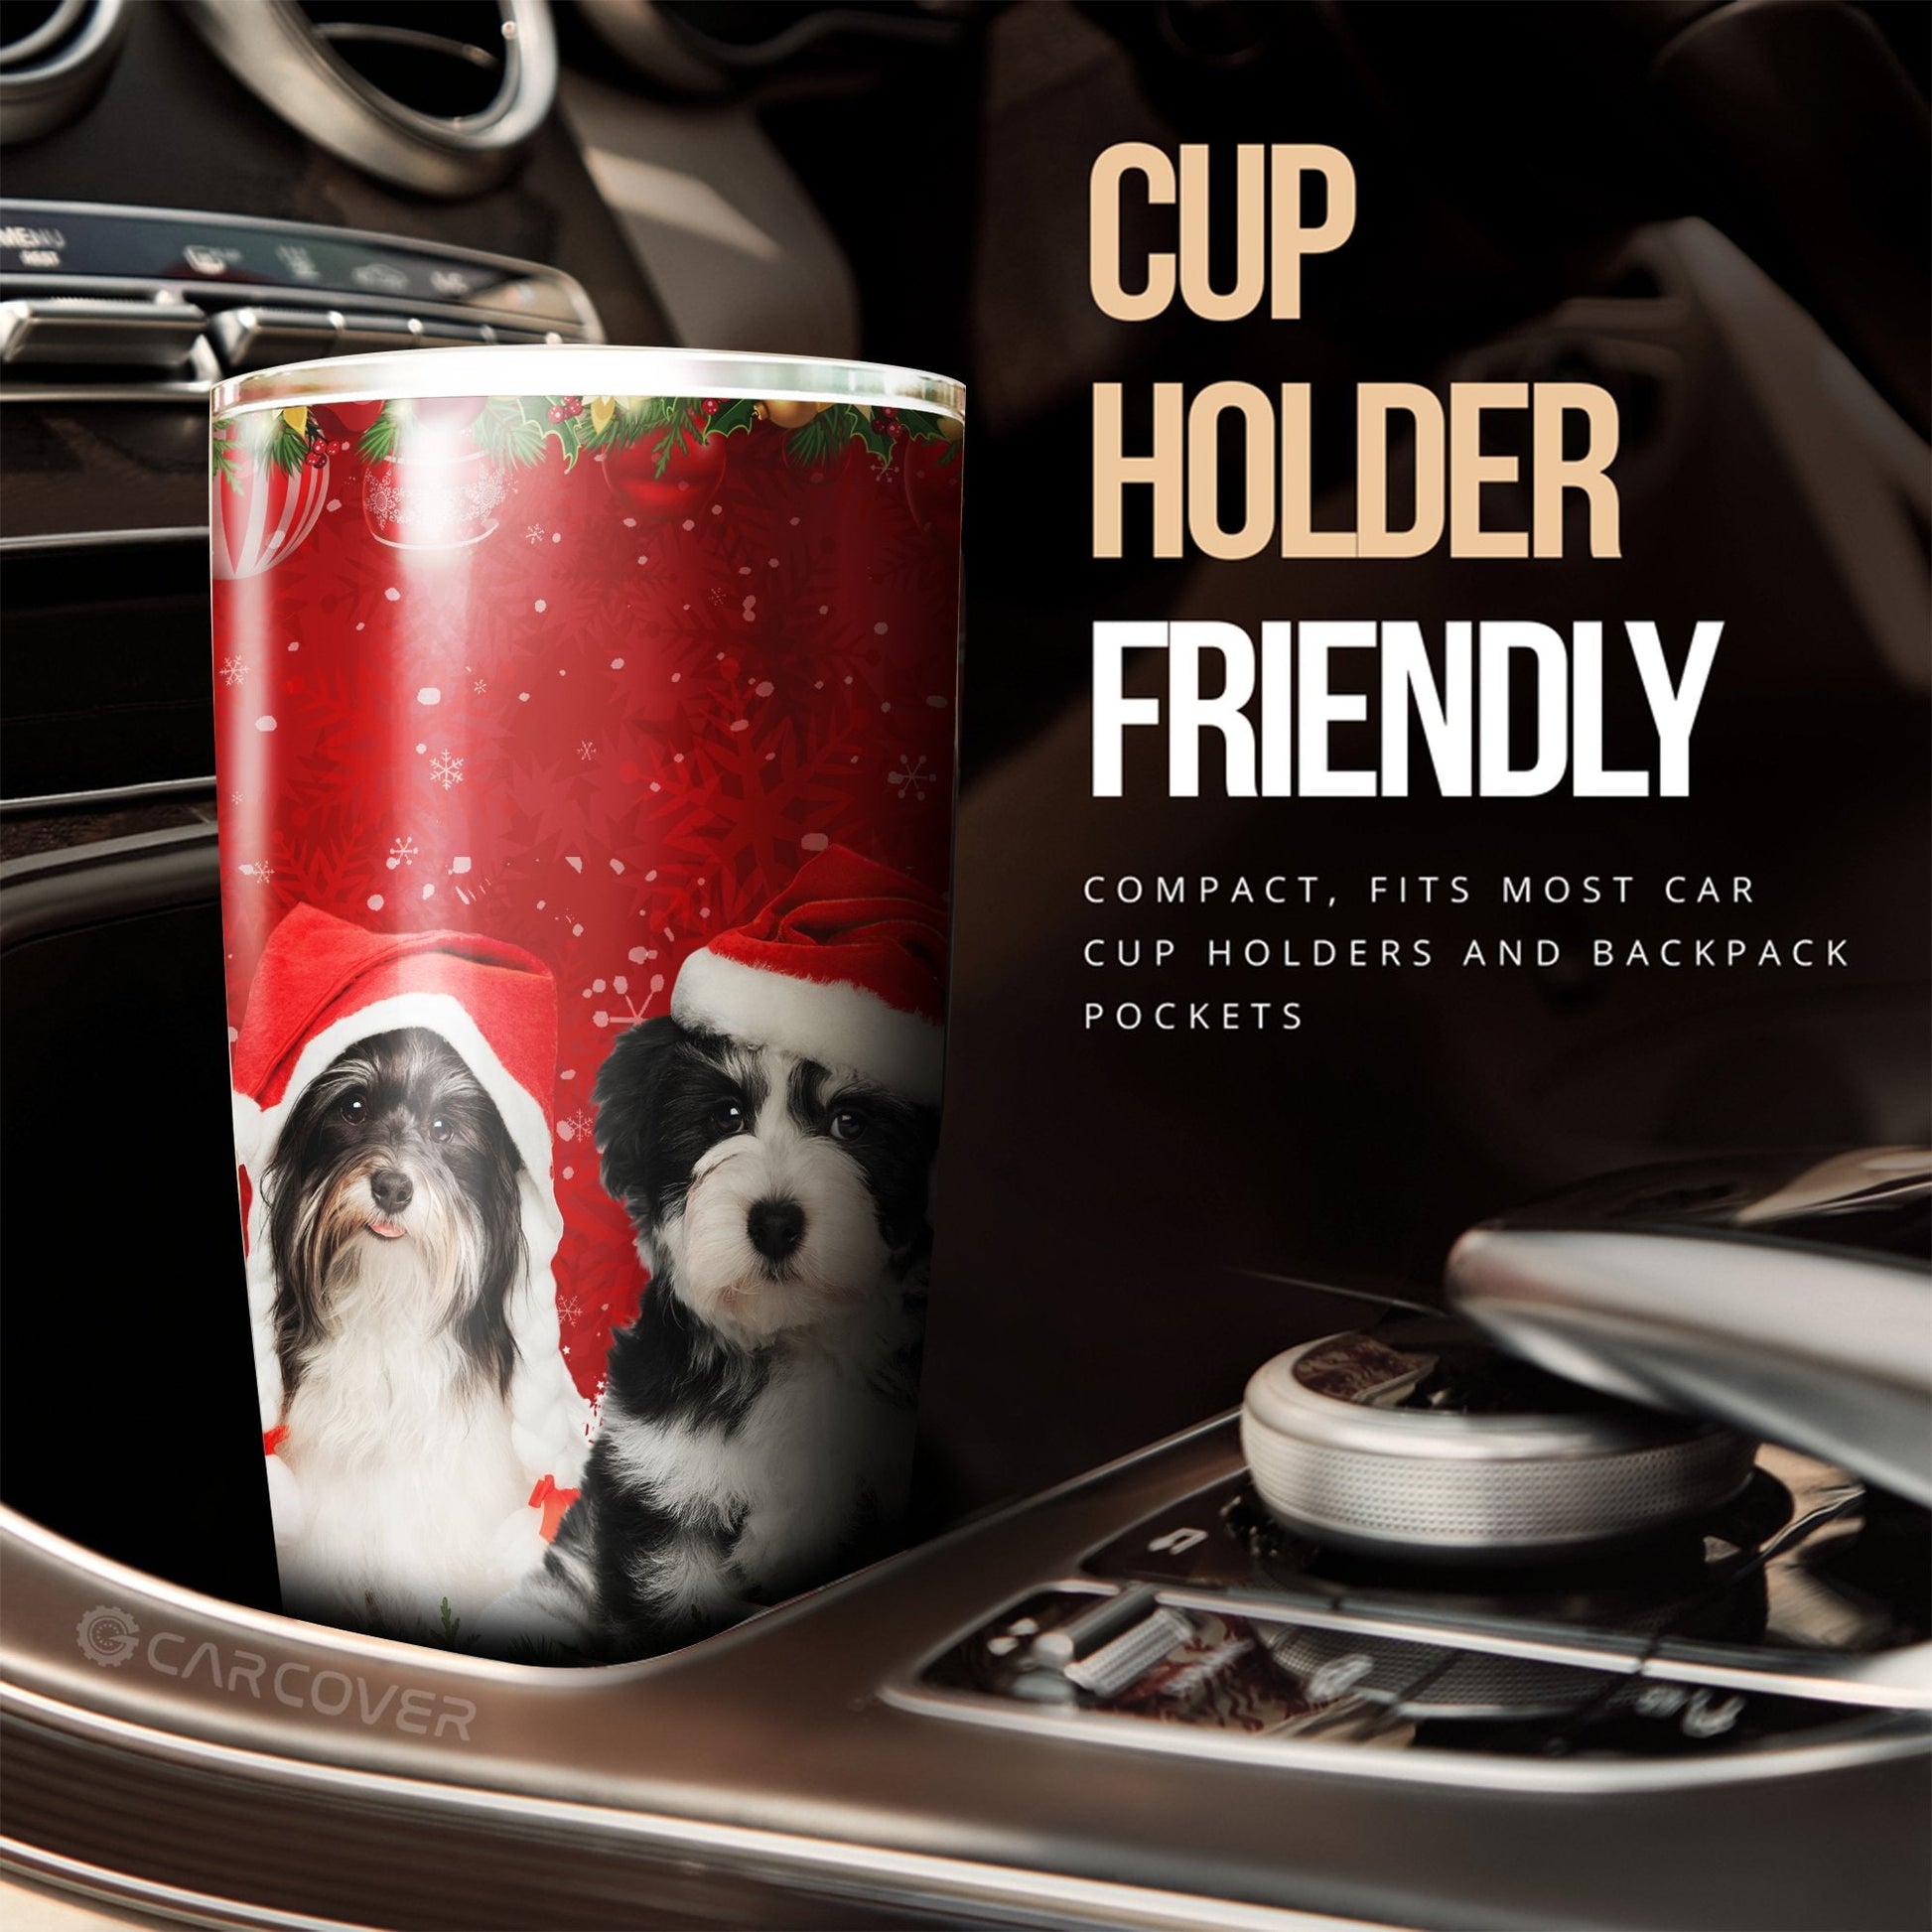 Shih Tzu Christmas Tumbler Cup Custom Car Accessories For Dog Lovers - Gearcarcover - 3